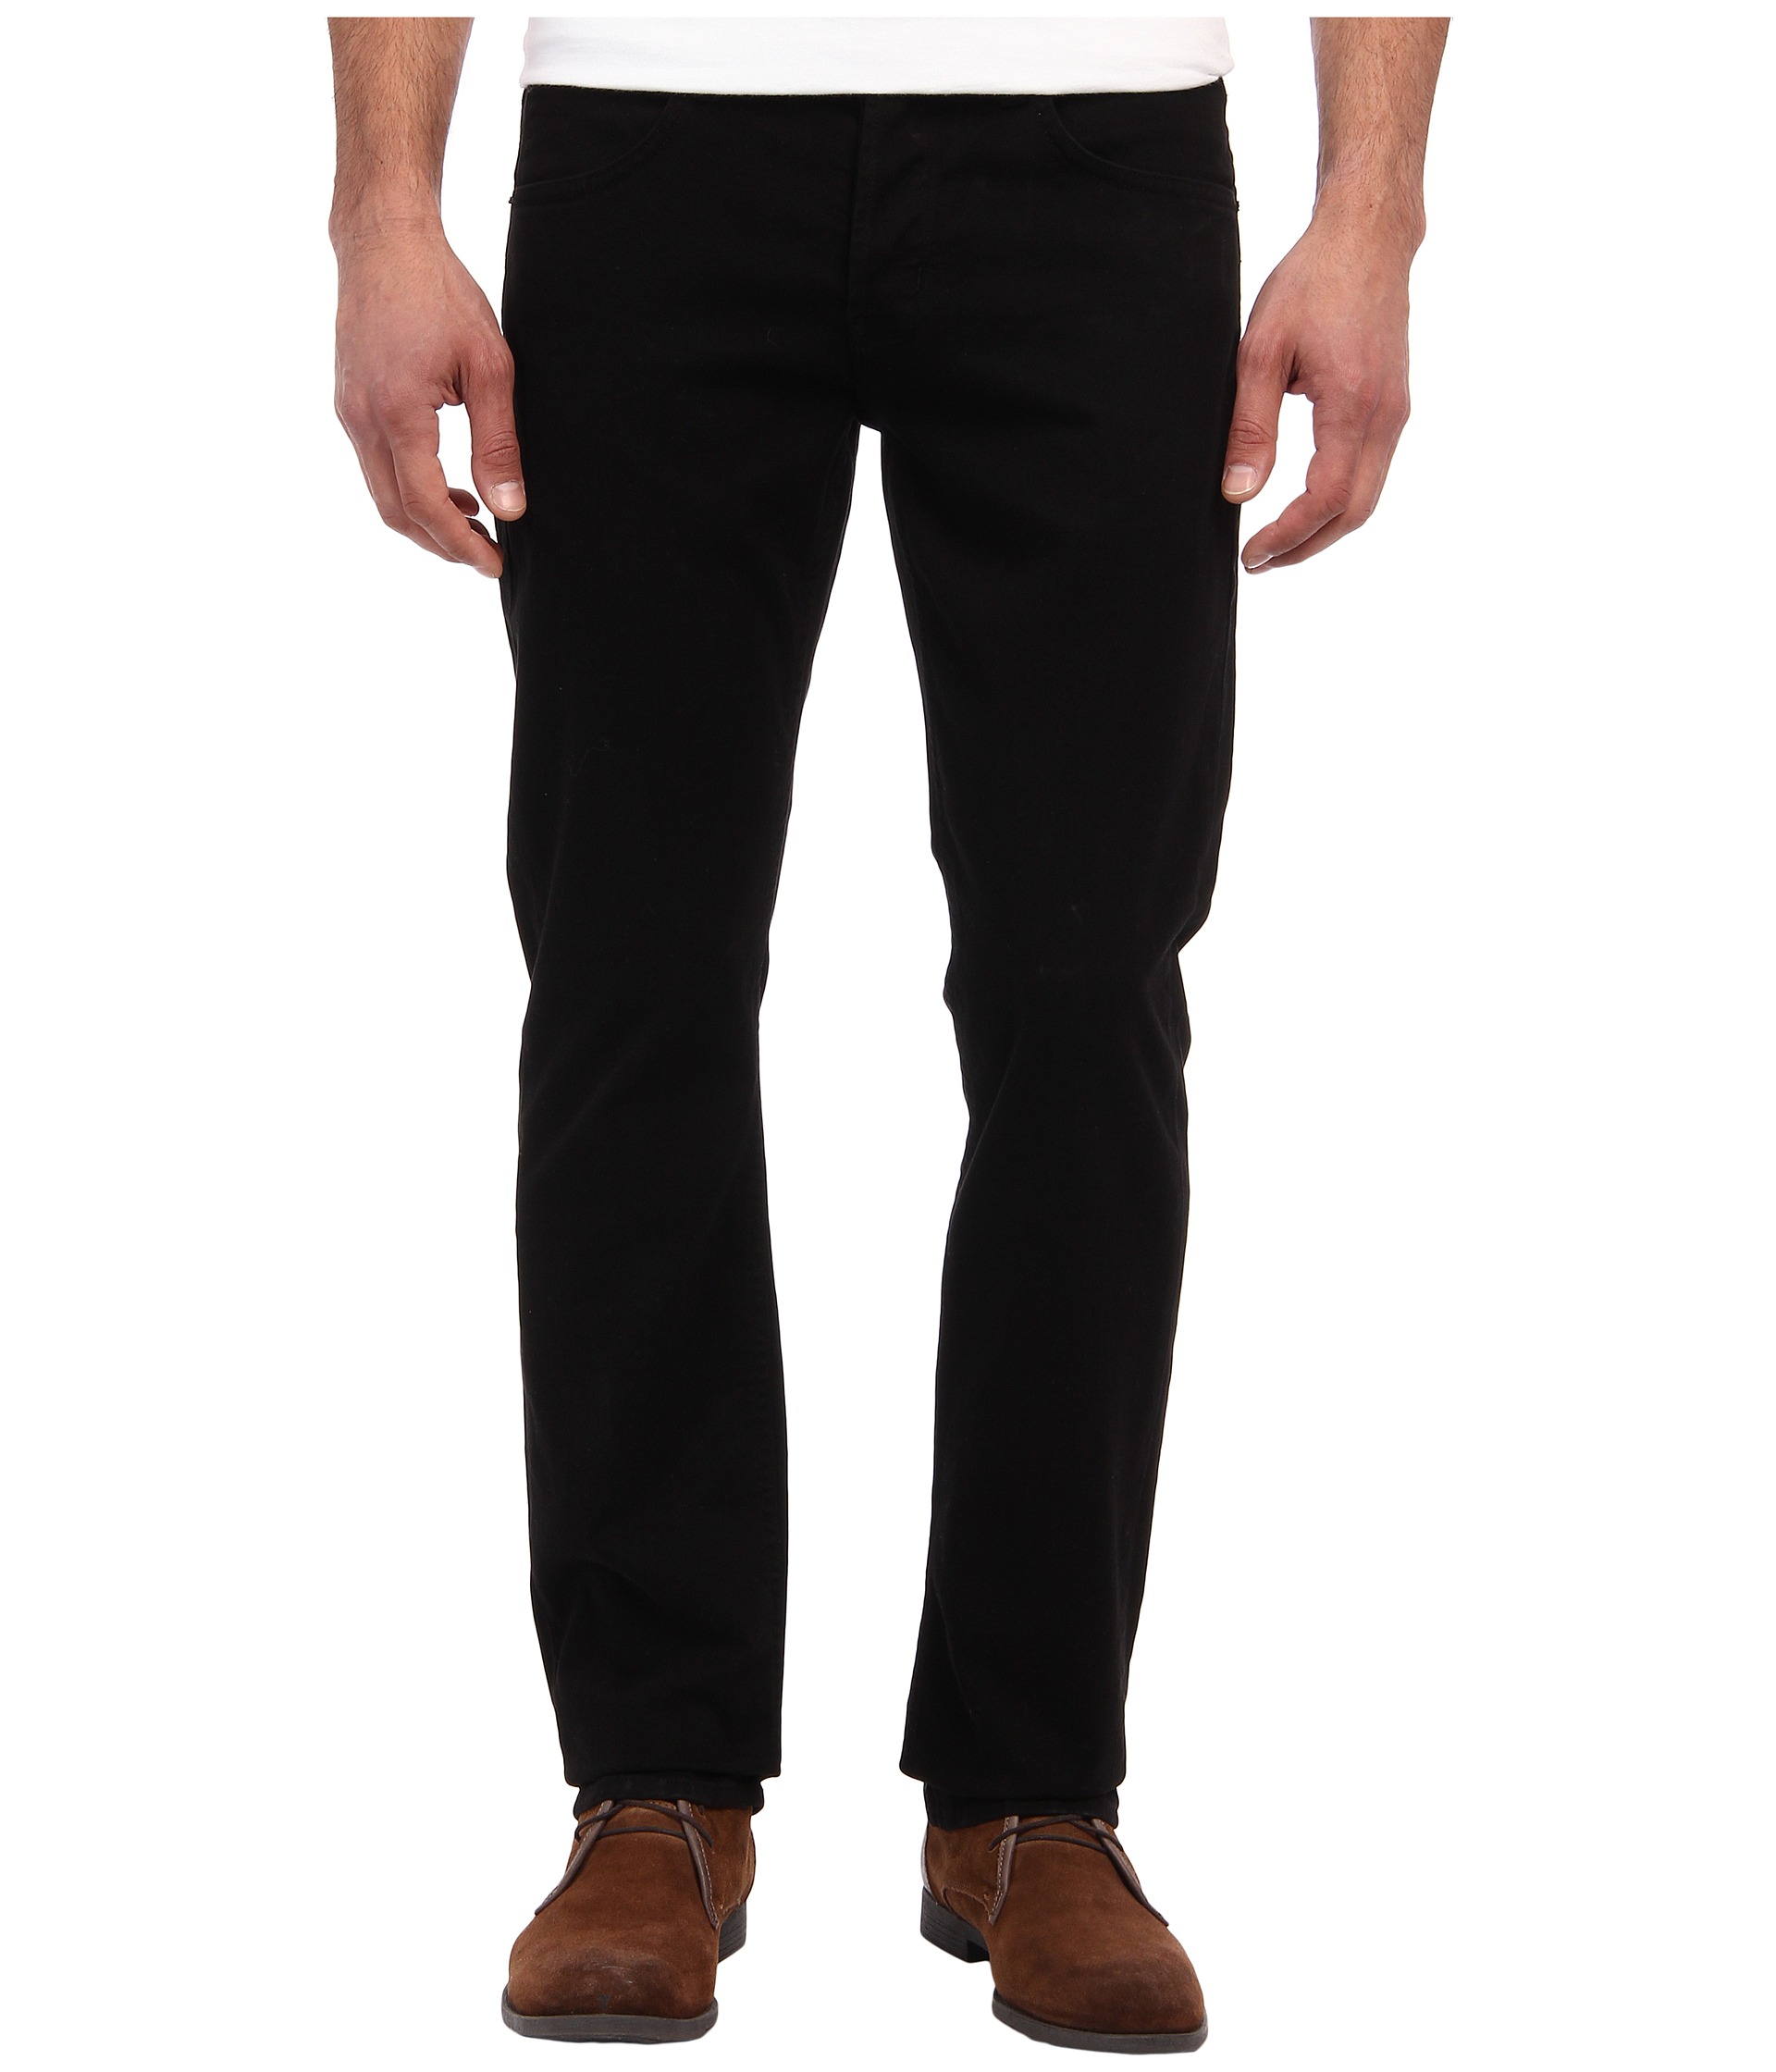 Hudson Byron Five Pocket Straight in Jet Black $165.00 NEW AG Adriano 